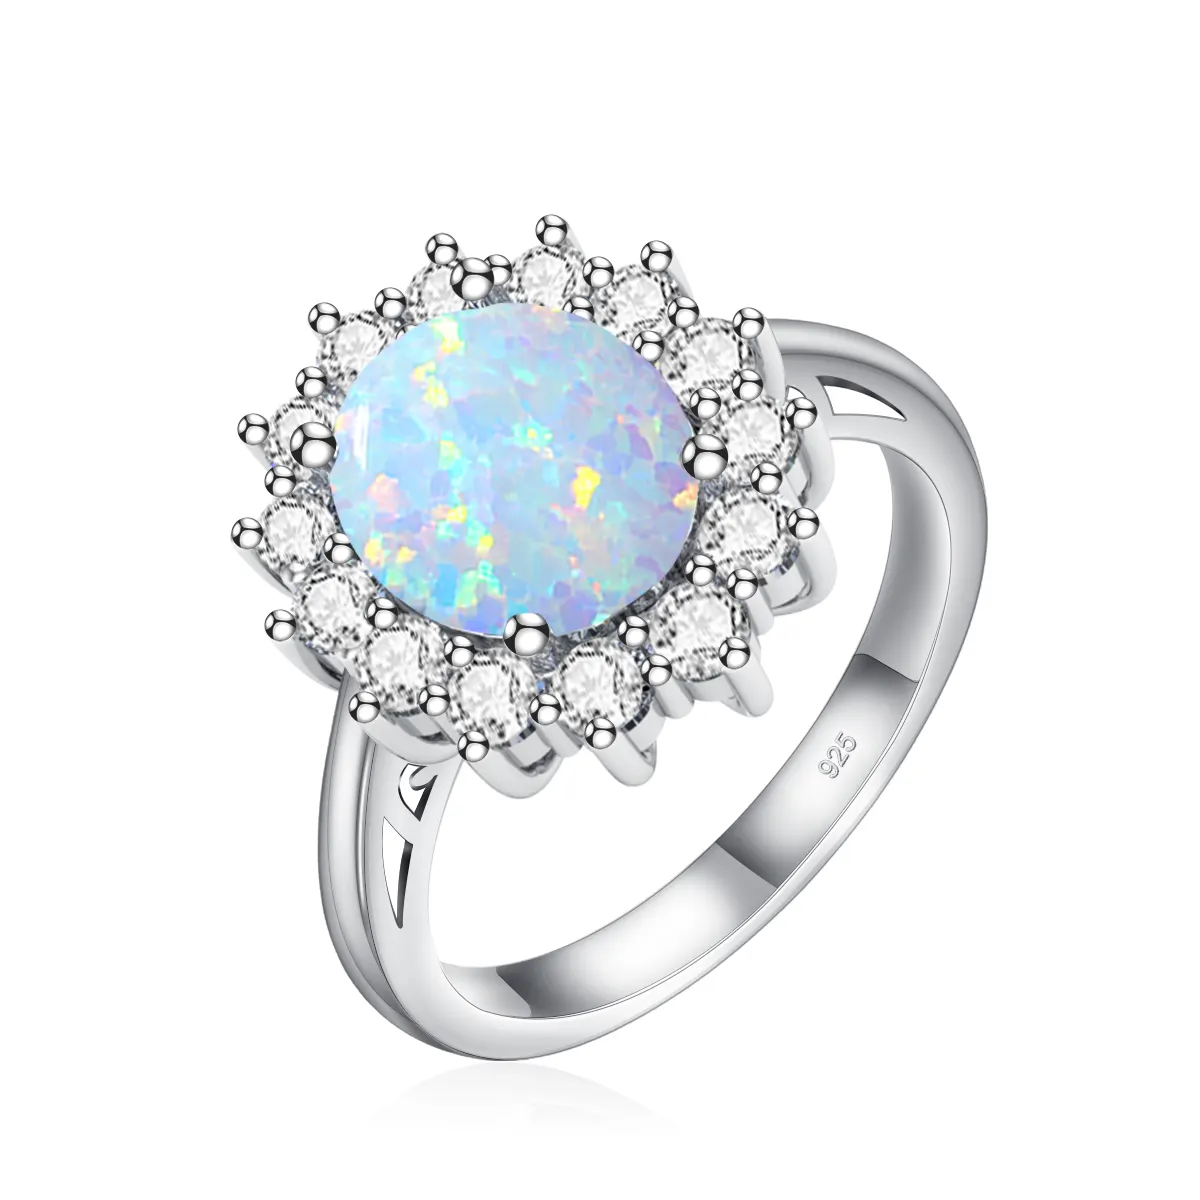 Premium Quality Royal Jewelry Gift Woman 925 Sterling Silver Birthstone Opal Rings Jewelery bijoux